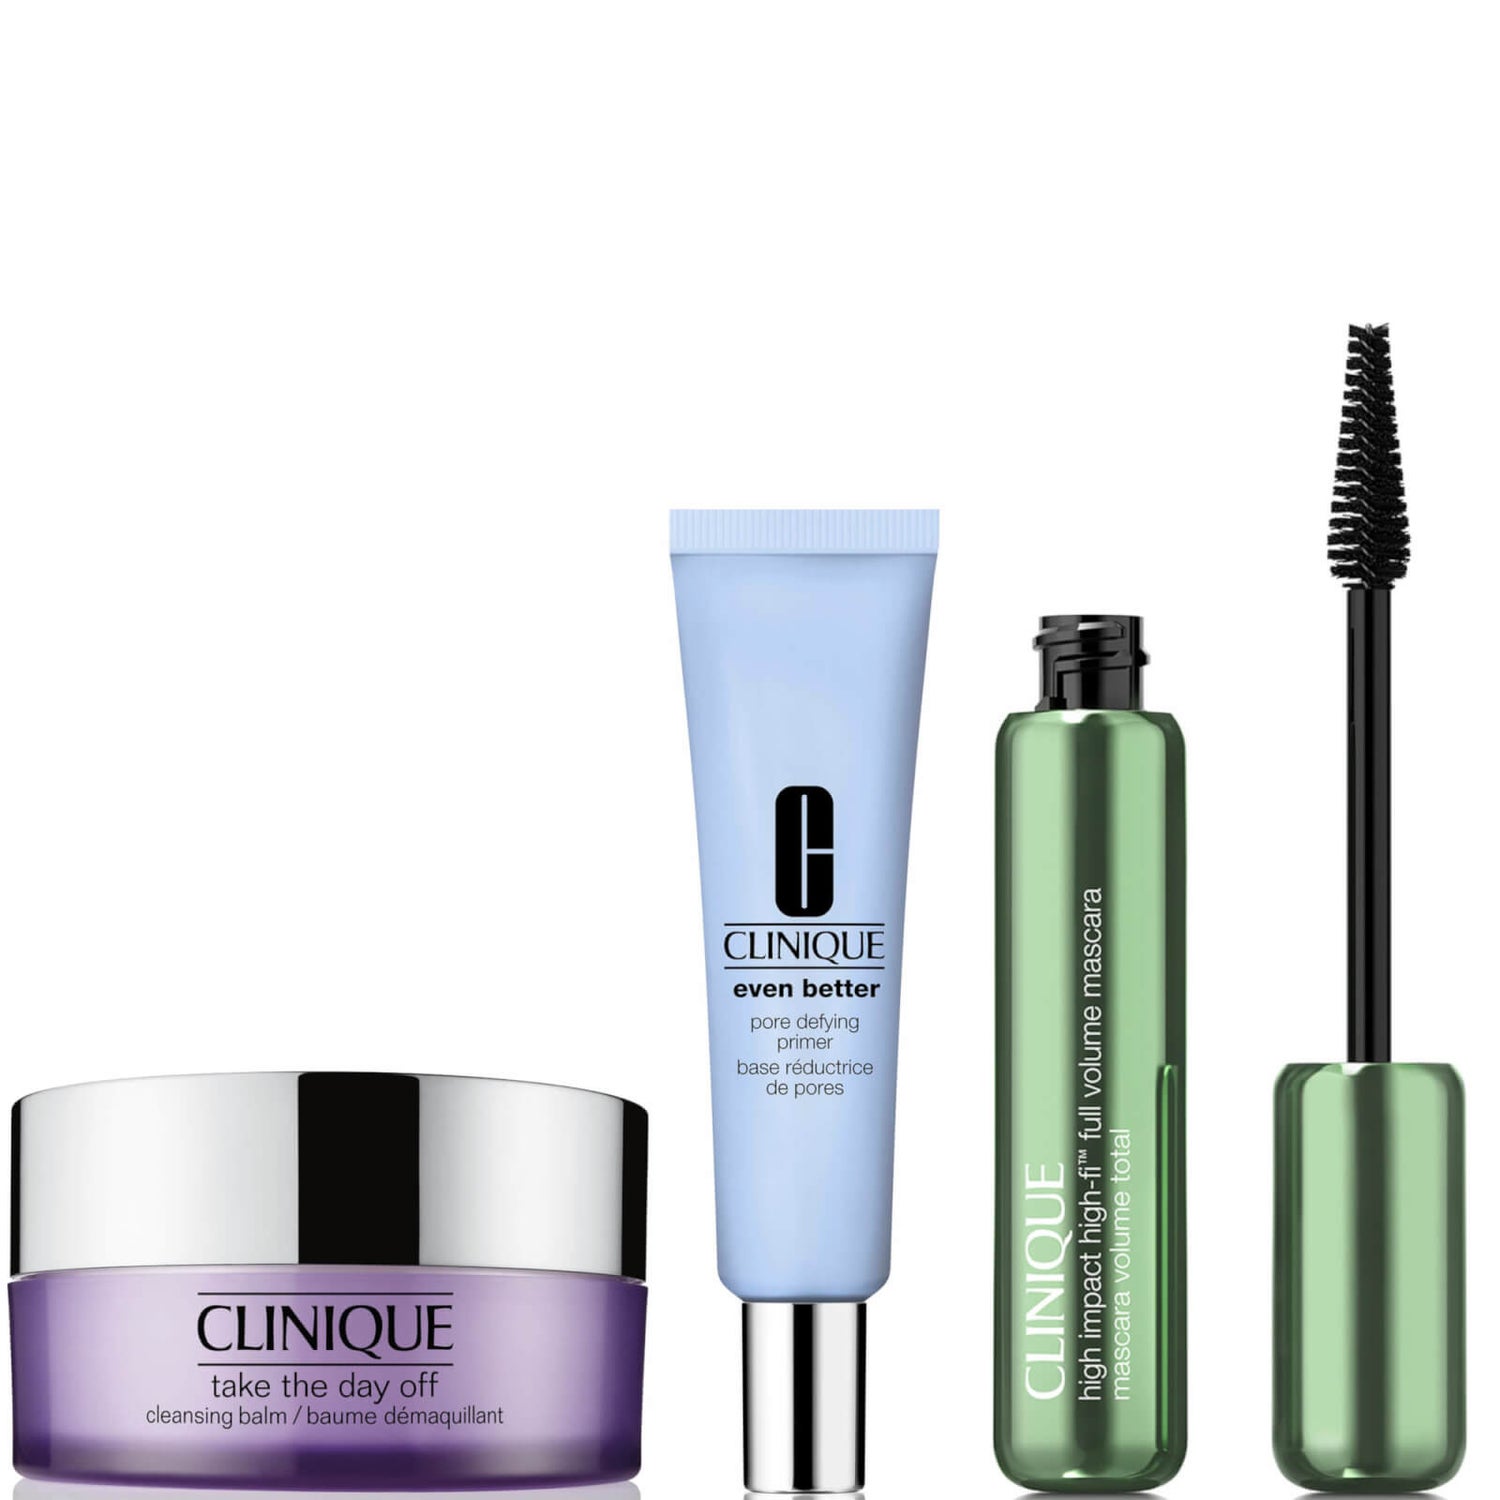 Clinique GRWM Bundle: New In Beauty Edition (Various Options) (Worth £89.00)